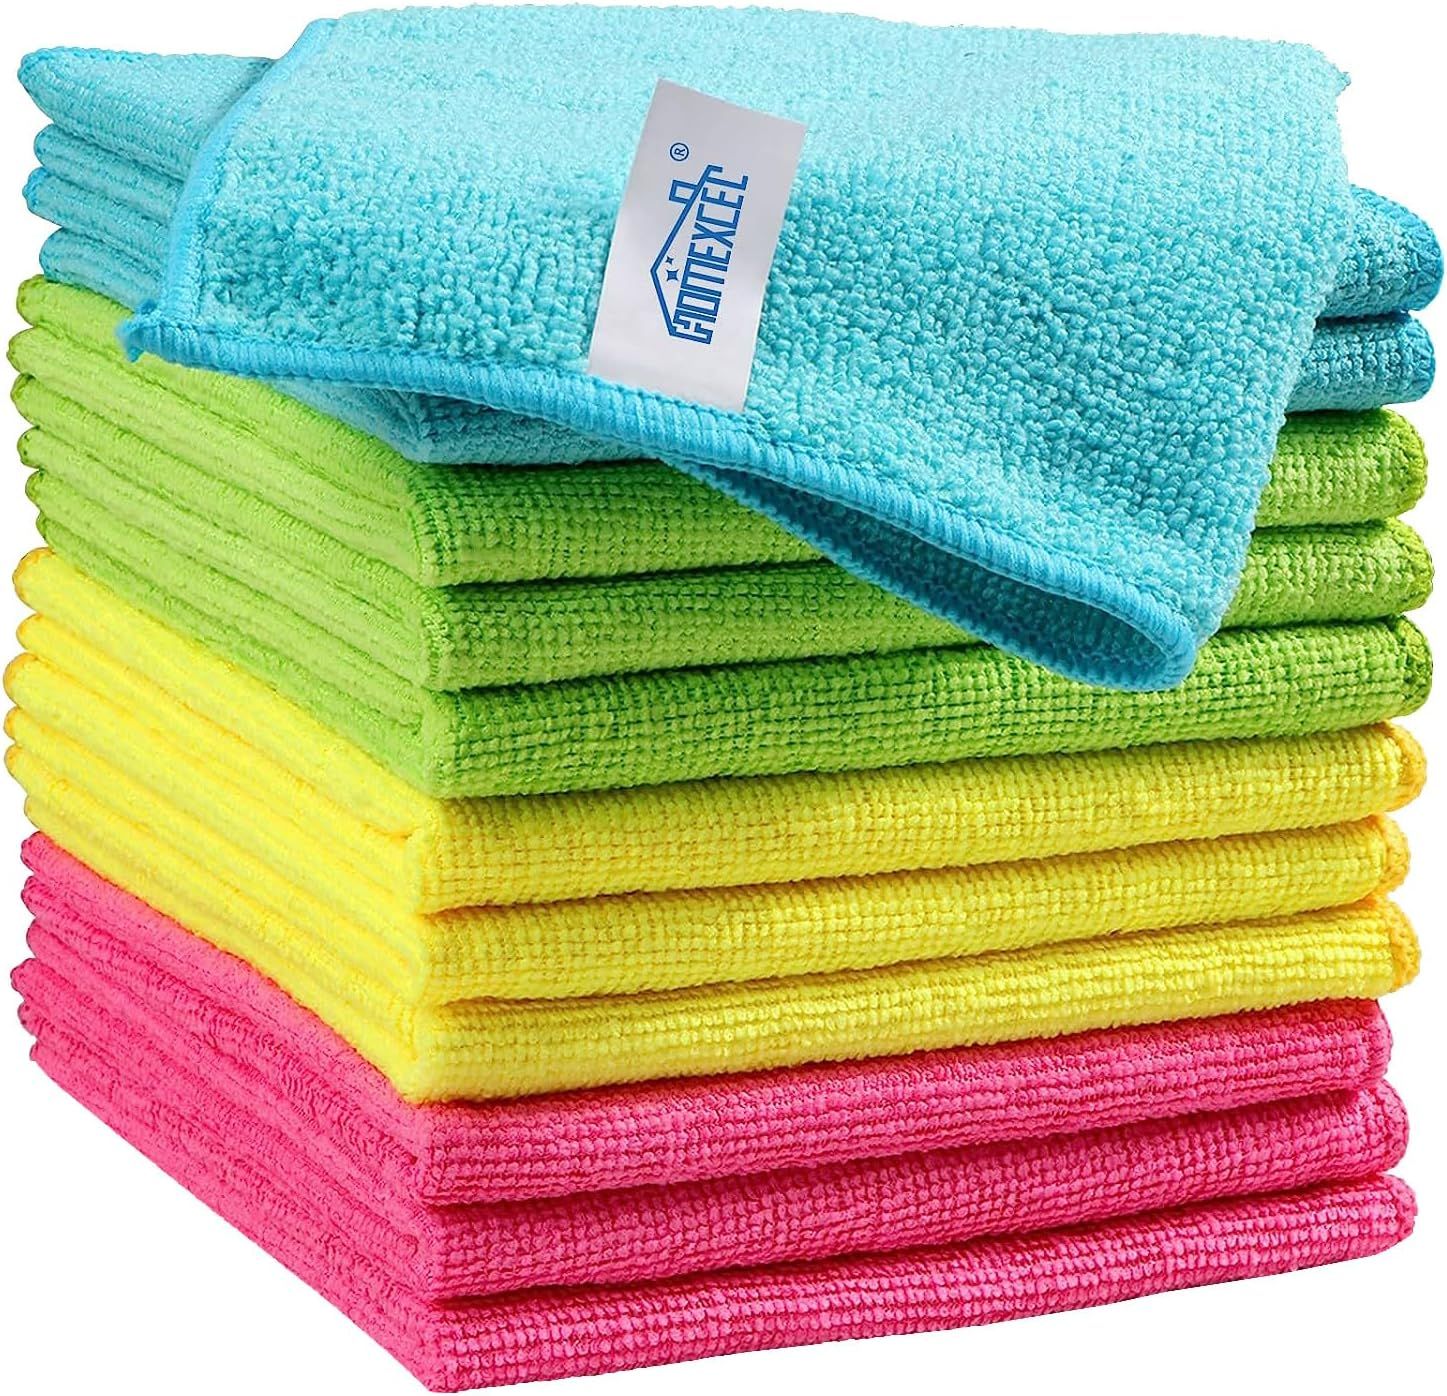 Top 10 Best Reusable Cleaning Cloths for Eco-Friendly Cleaning